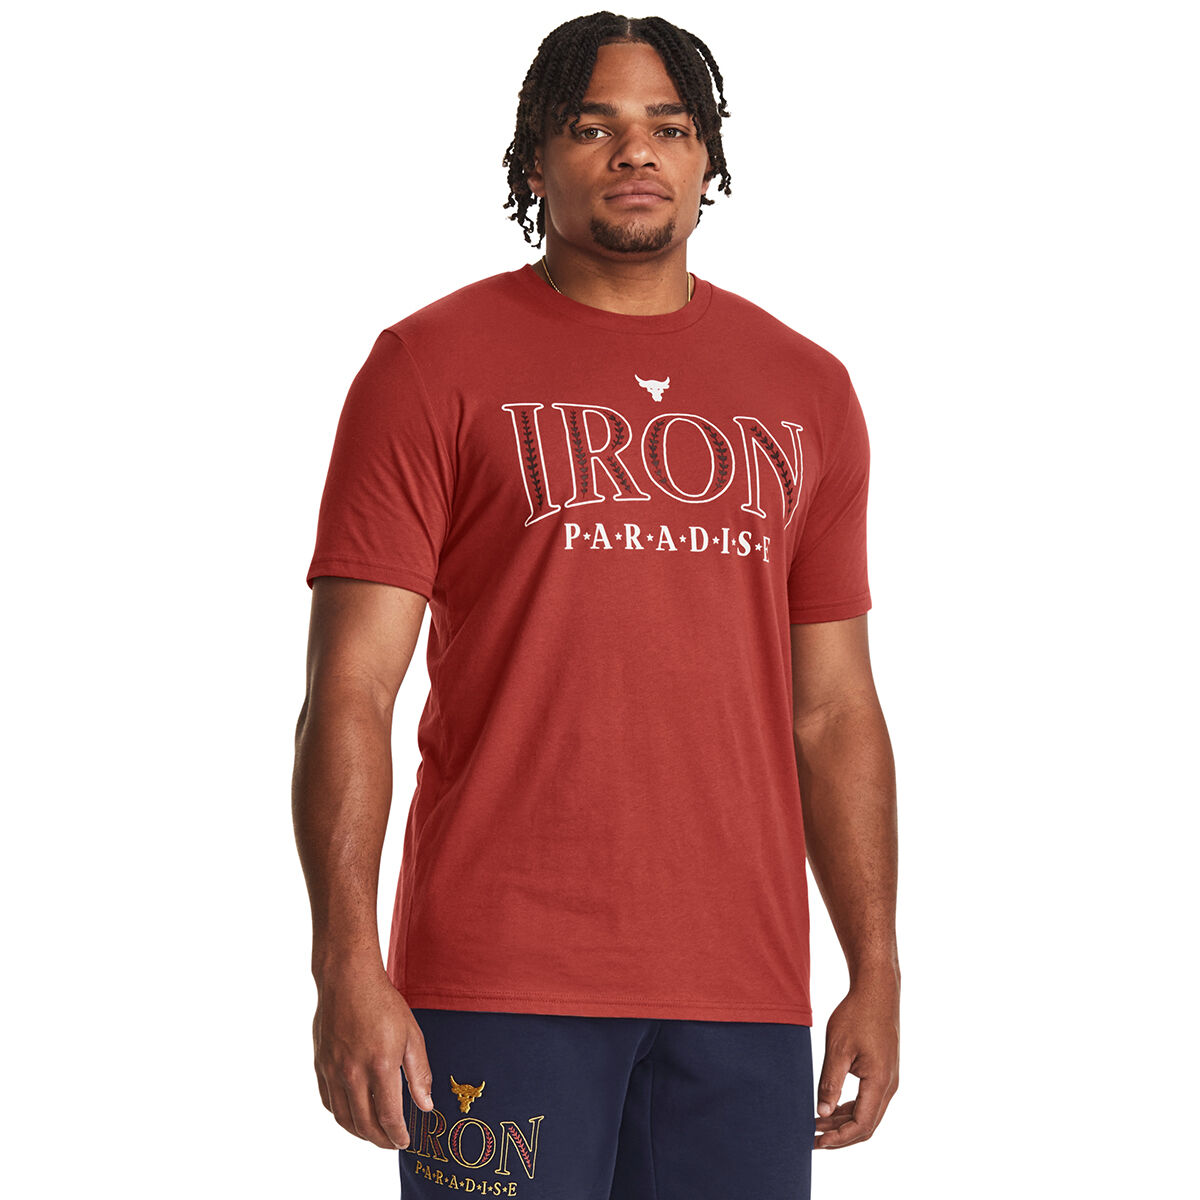 Under Armour Project Rock Mens Iron Paradise Tee | Rebel Sport